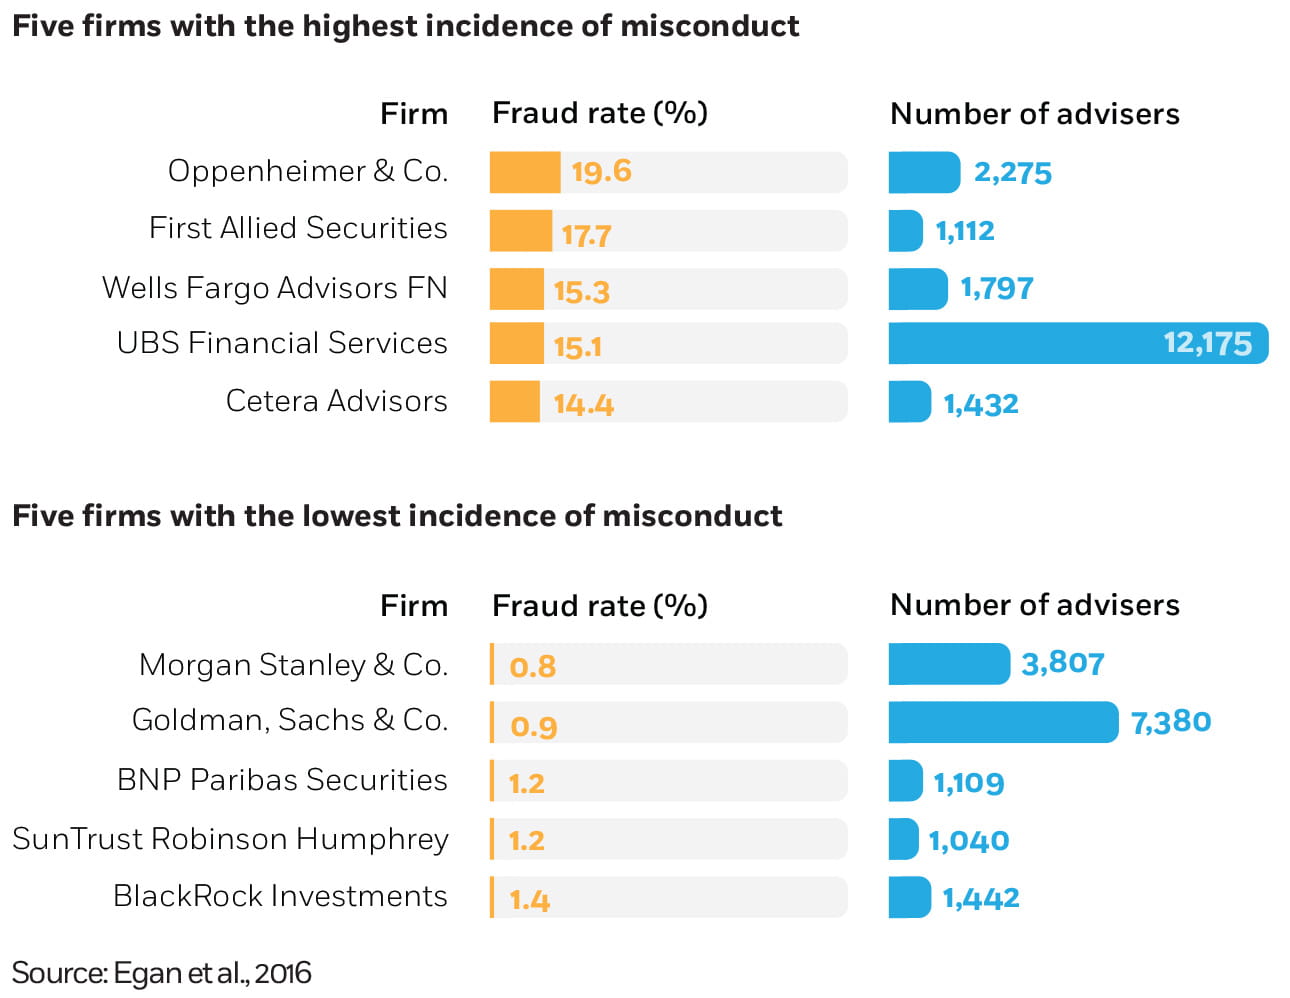 A bar chart ranking of the five financial advisory companies with the highest incidence of misconduct, led by Oppenheimer and Company with nineteen-point-six percent and followed by First Allied Securities; Wells Fargo Advisors; U.B.S. Financial Services; and Cetera Advisors. A companion bar chart plots the companies number of advisers, led by U.B.S. with twelve thousand one hundred seventy-five, with the rest ranging from one thousand one hundred twelve to two thousand two hundred seventy-five. Another bar chart lists the five companies with the lowest incidence of misconduct, led by Morgan Stanley and Company with zero-point-eight percent, and followed by Goldman, Sachs, and Company; B.N.P. Paribas Securities; SunTrust Robinson Humphrey; and BlackRock Investments. A companion chart plots the number of advisors, led by Goldman with seven thousand three hundred eighty and the rest ranging from one thousand forty to three thousand eight hundred seven.A bar chart ranking of the five financial advisory companies with the highest incidence of misconduct, led by Oppenheimer and Company with nineteen-point-six percent and followed by First Allied Securities; Wells Fargo Advisors; U.B.S. Financial Services; and Cetera Advisors. A companion bar chart plots the companies number of advisers, led by U.B.S. with twelve thousand one hundred seventy-five, with the rest ranging from one thousand one hundred twelve to two thousand two hundred seventy-five. Another bar chart lists the five companies with the lowest incidence of misconduct, led by Morgan Stanley and Company with zero-point-eight percent, and followed by Goldman, Sachs, and Company; B.N.P. Paribas Securities; SunTrust Robinson Humphrey; and BlackRock Investments. A companion chart plots the number of advisors, led by Goldman with seven thousand three hundred eighty and the rest ranging from one thousand forty to three thousand eight hundred seven.